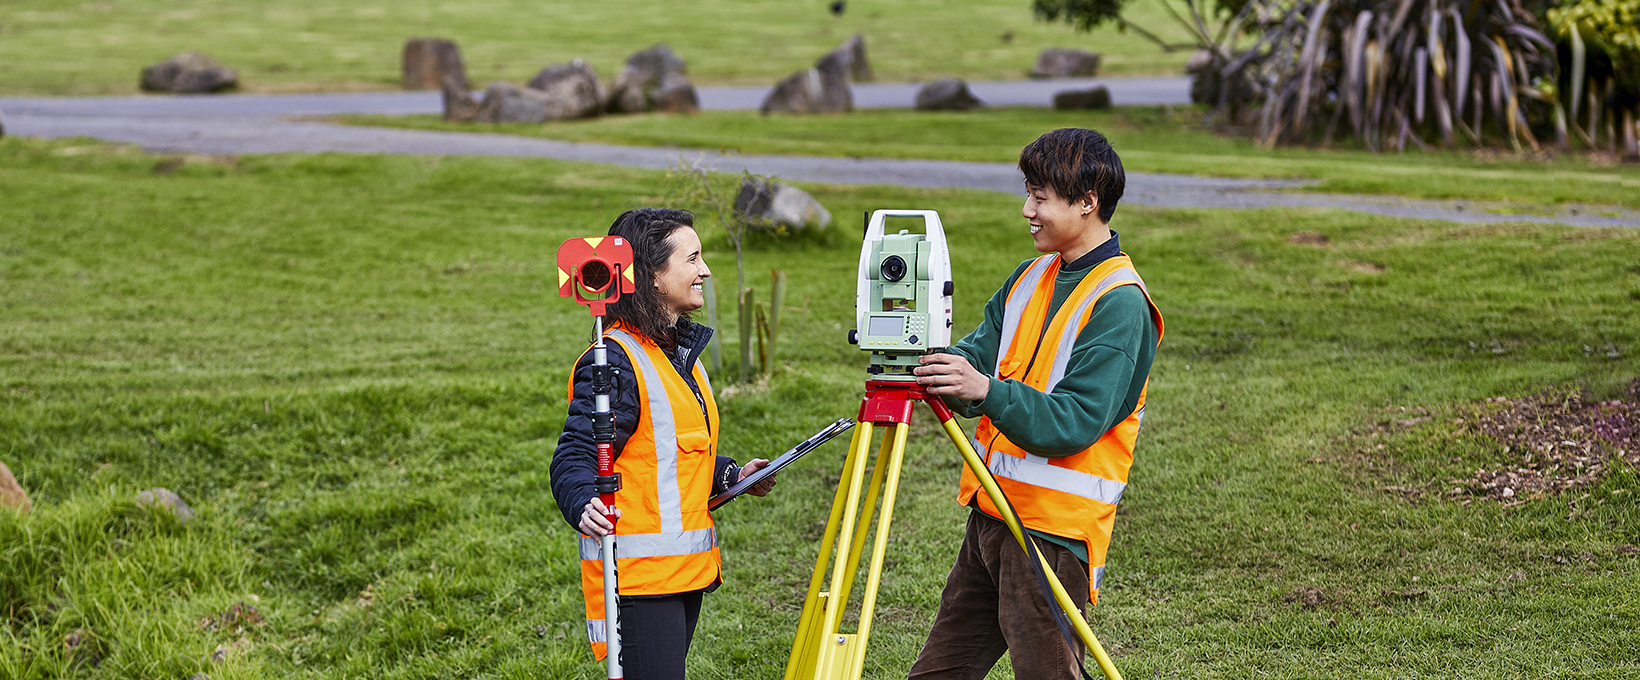 Two students operating a total station machine in the outdoor environment next to a stream